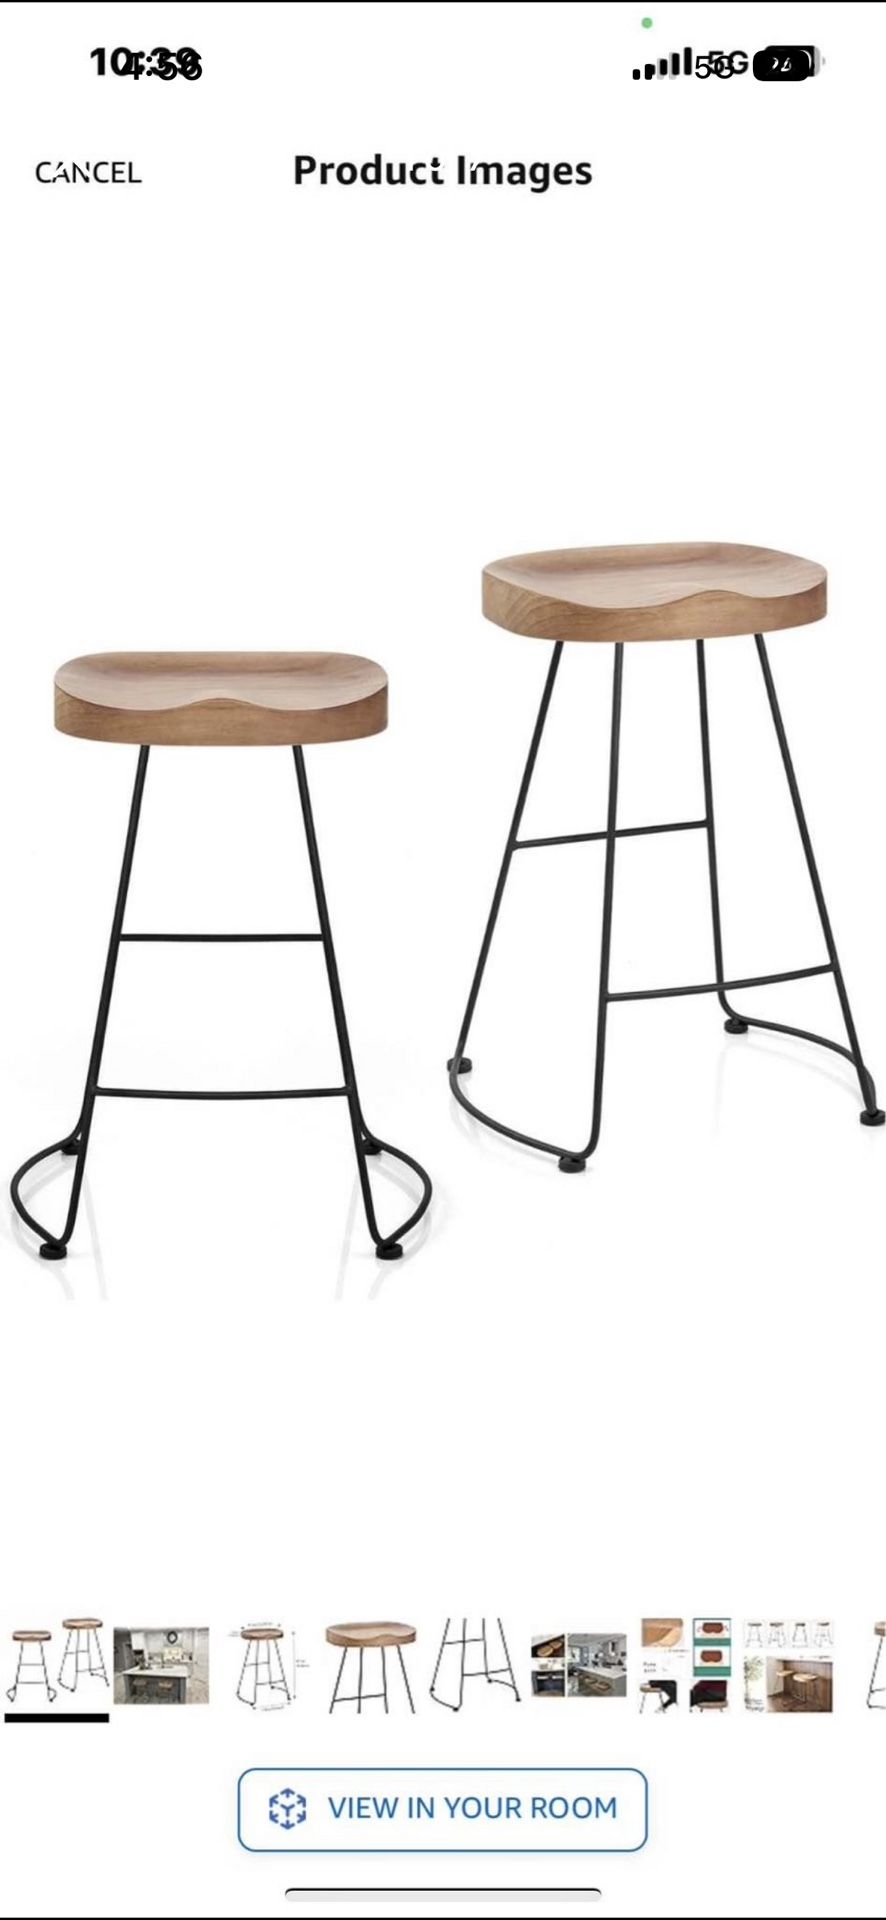    Set of 2 American Elegant Retro Country Style Bar Chair, Modern Fashion Simple Bar Stool, Mid Century Dining Wooden Chair High Stool, 2